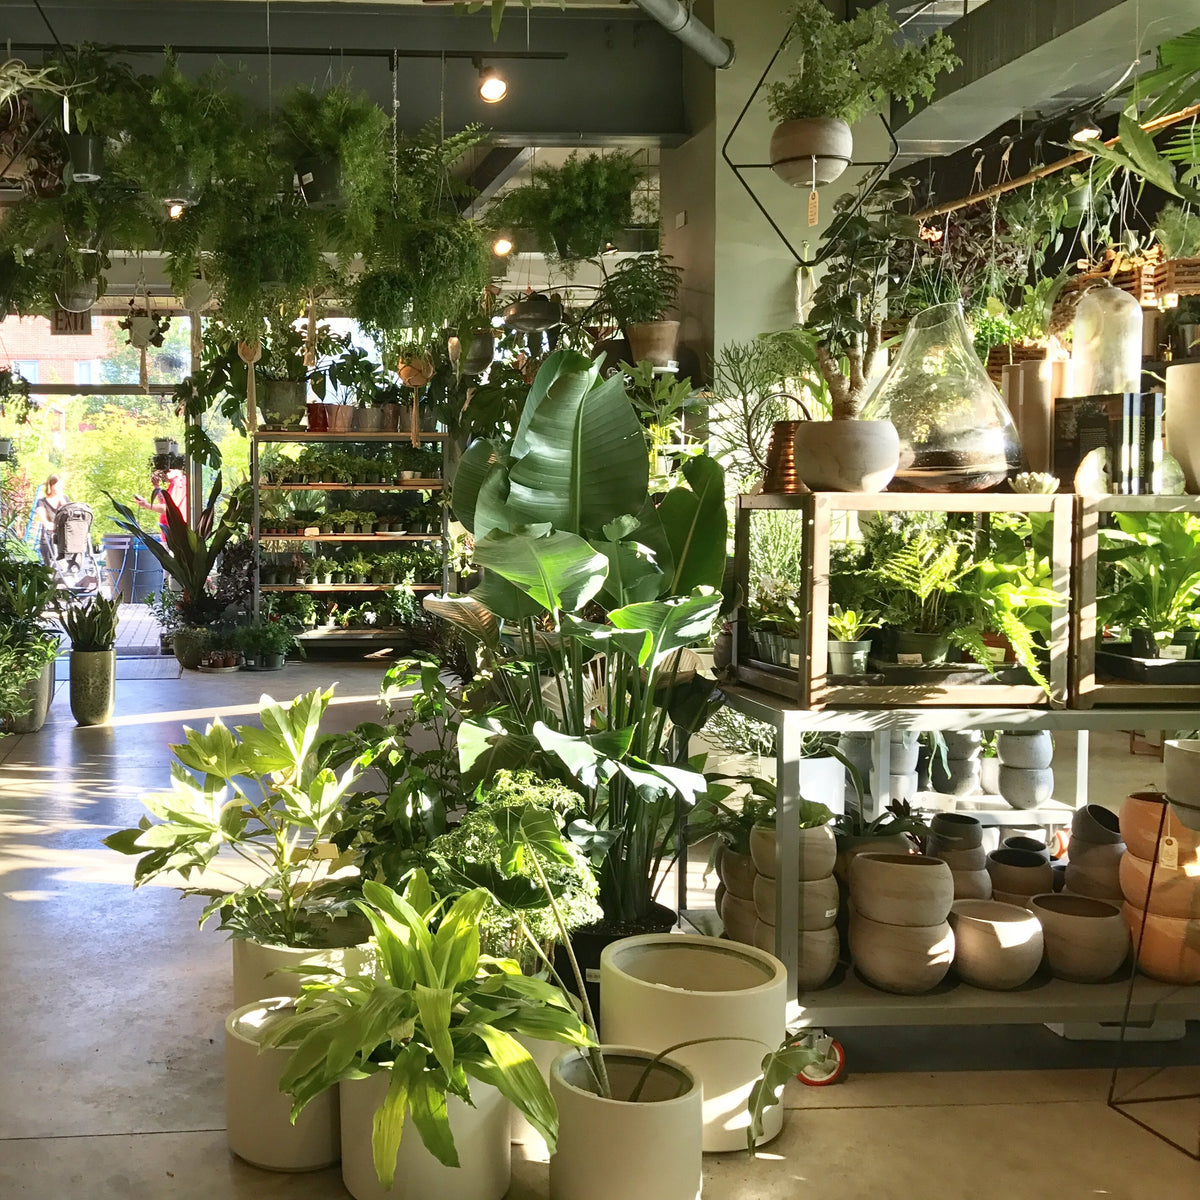 Interior of Sprout Home's garden store